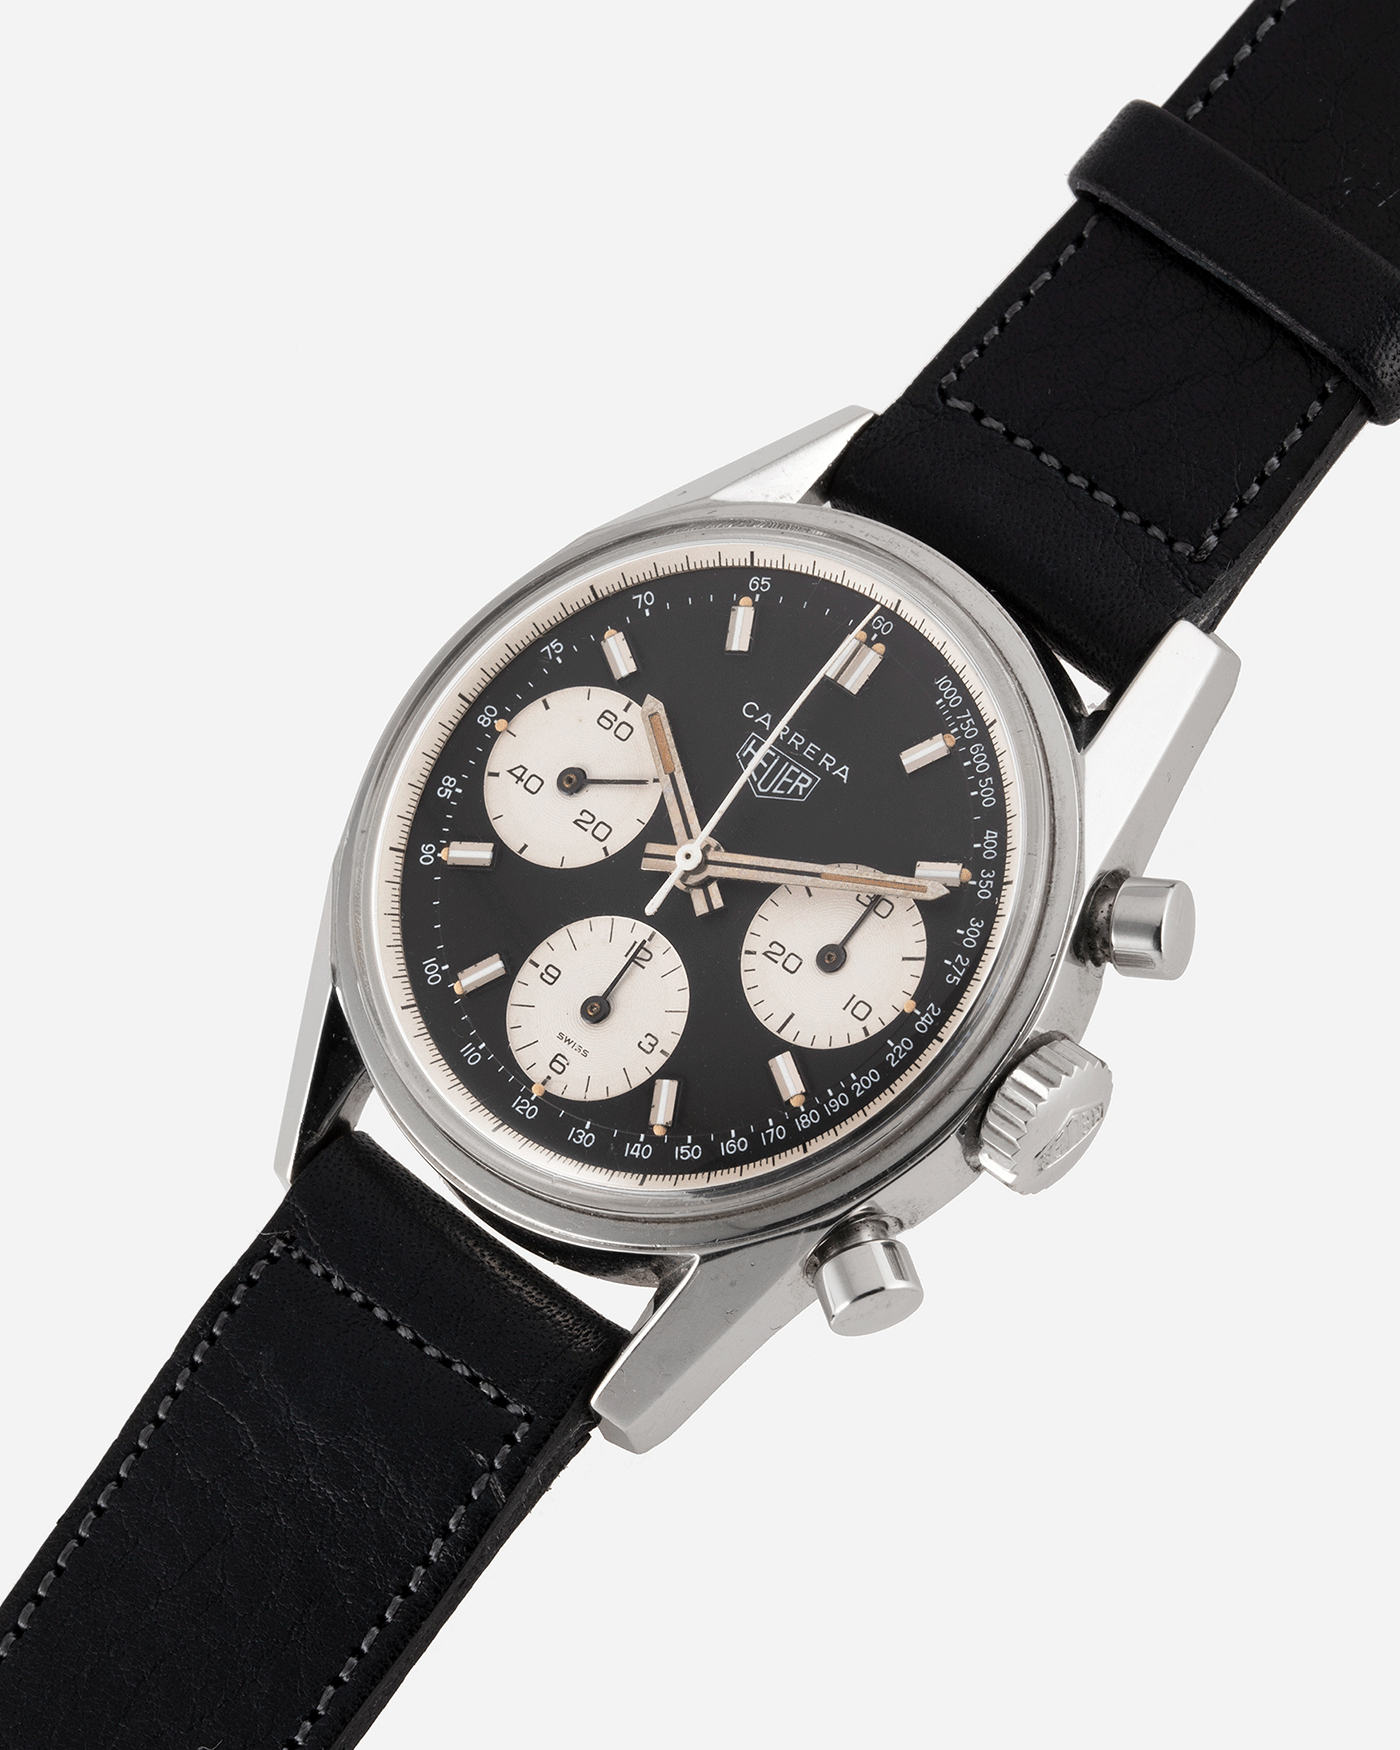 Brand: Heuer Year: 1960’s Model: Carrera Reference Number: 2447NST Material: Stainless Steel Movement: Valjoux 72 Case Diameter: 36mm Lug Width: 18mm Bracelet/Strap: Accurate Form Navy Blue Calf